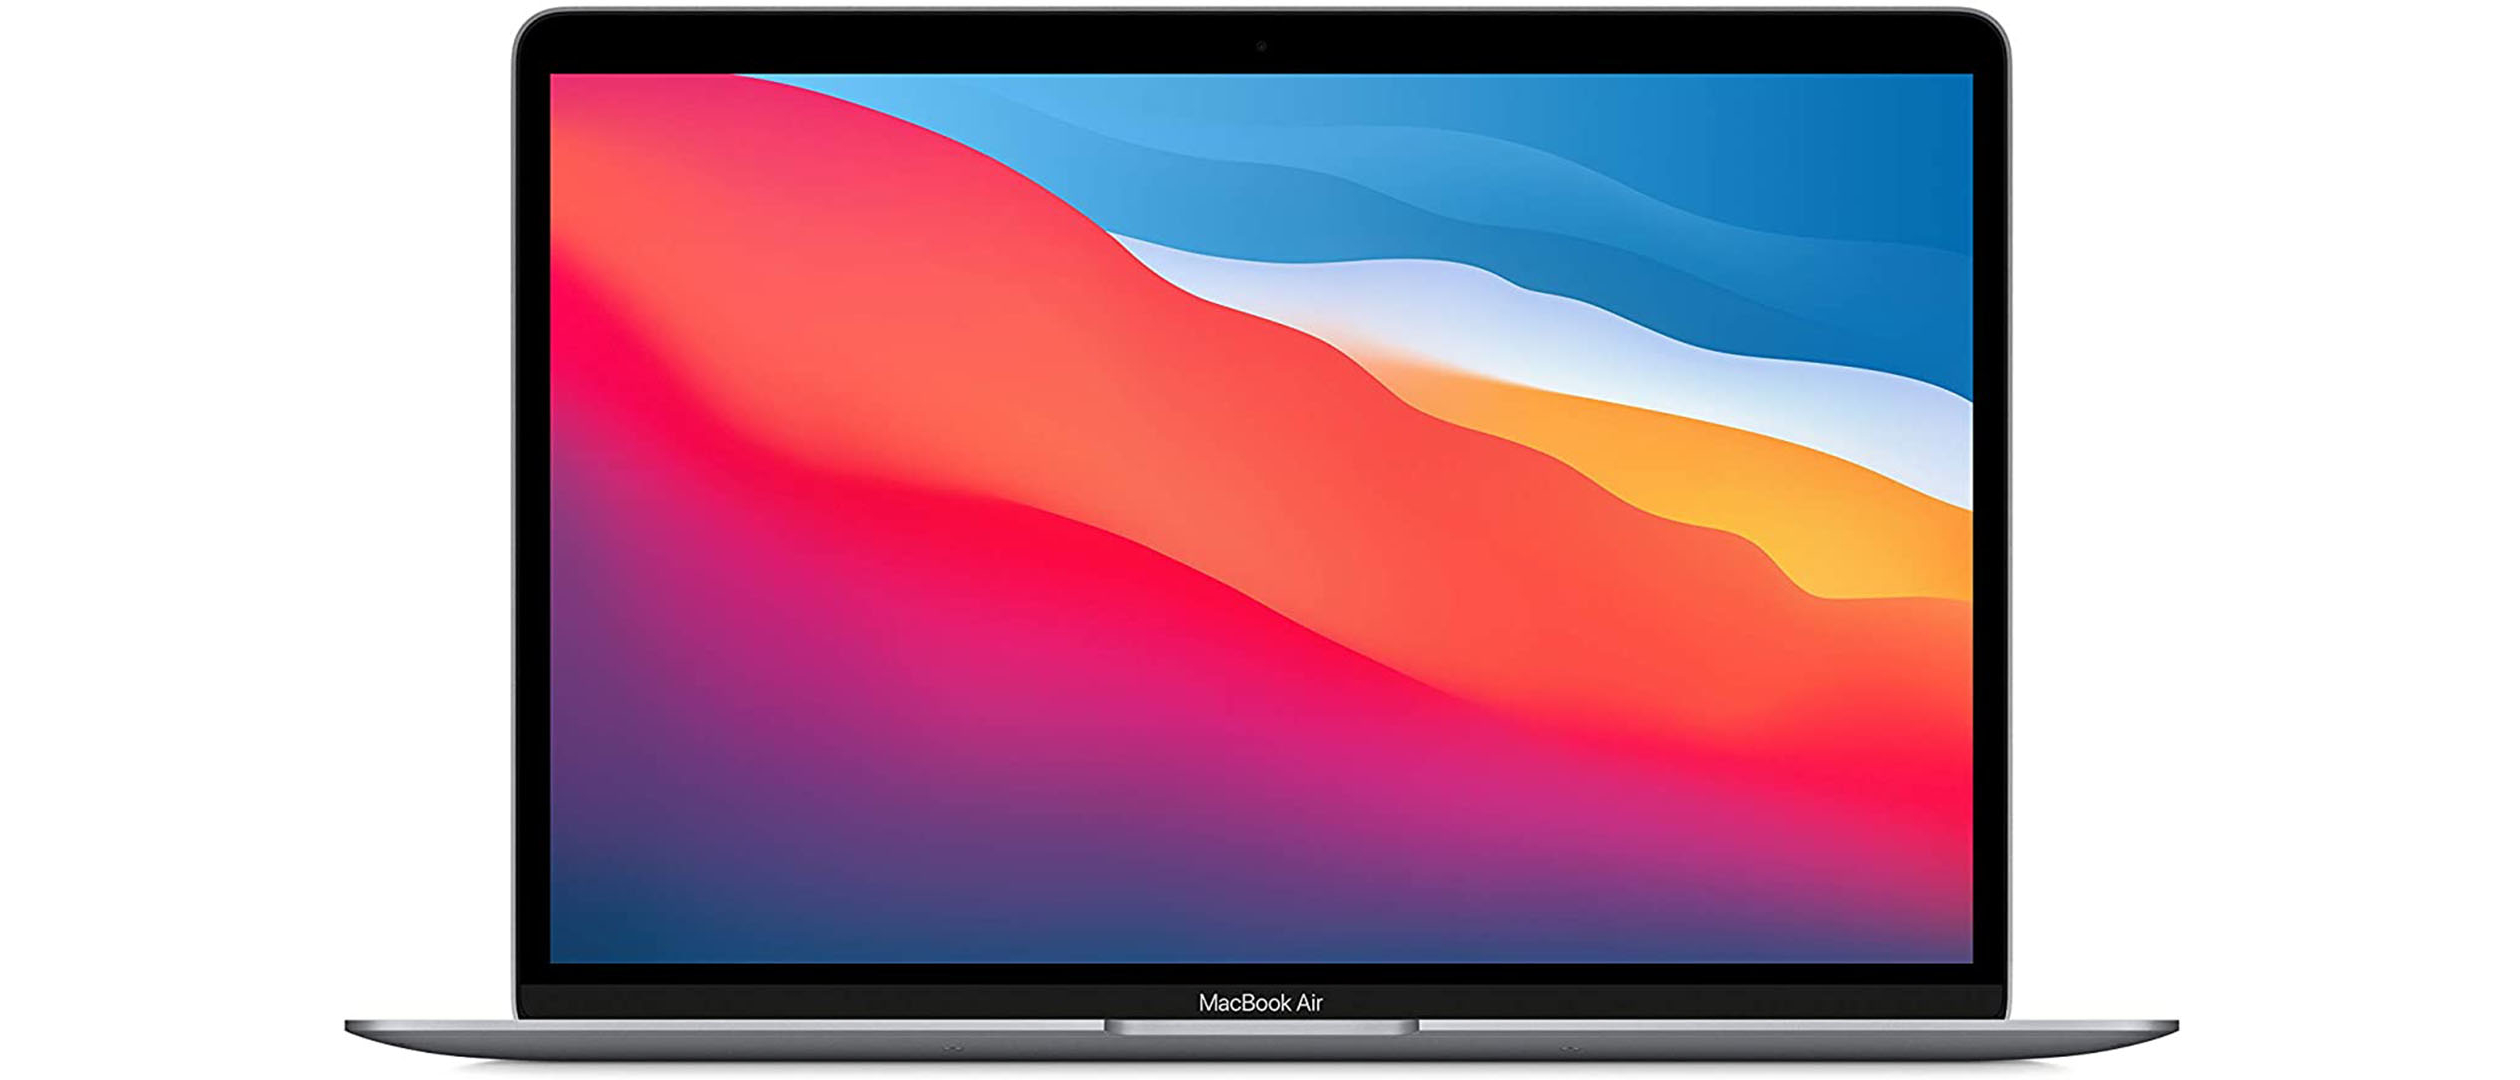 M1 MacBook Air in 2023 – Ultimate Long-Term Review Don't Buy M2 MacBook  Right Now… 